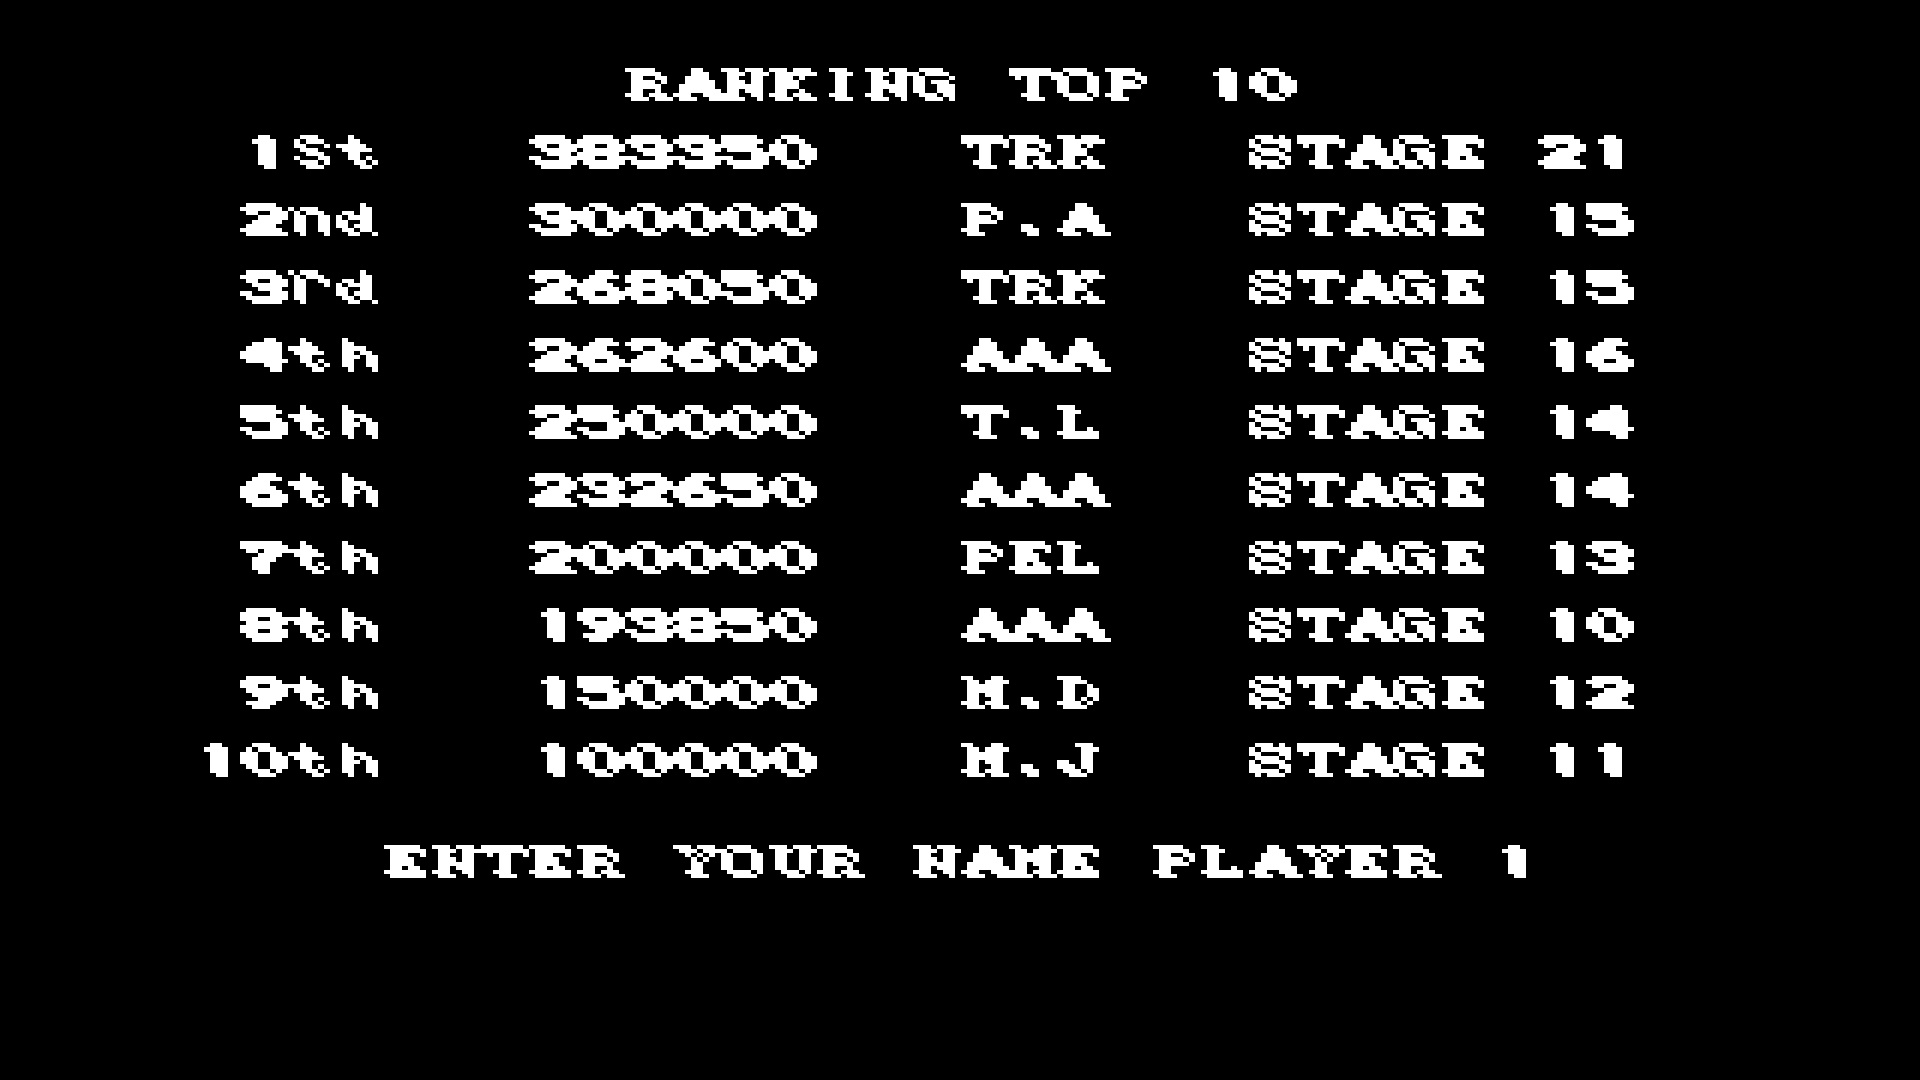 TheTrickster: Pang (Amiga Emulated) 383,350 points on 2015-08-01 00:12:05